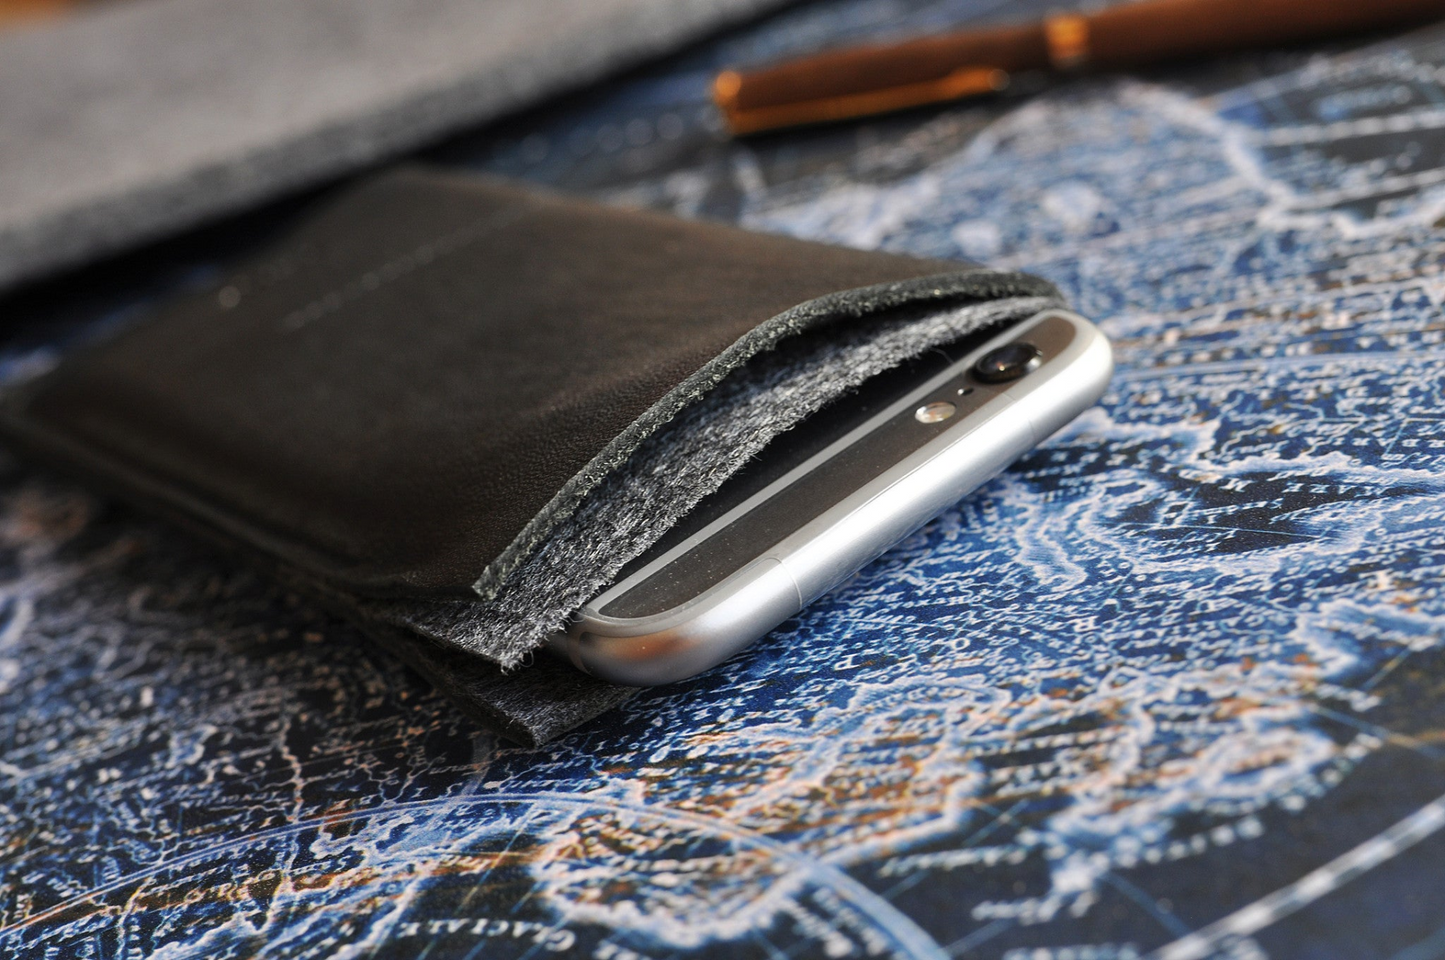 Premium American Horween Leather iPhone Wrap | Slim, Stylish, and Functional